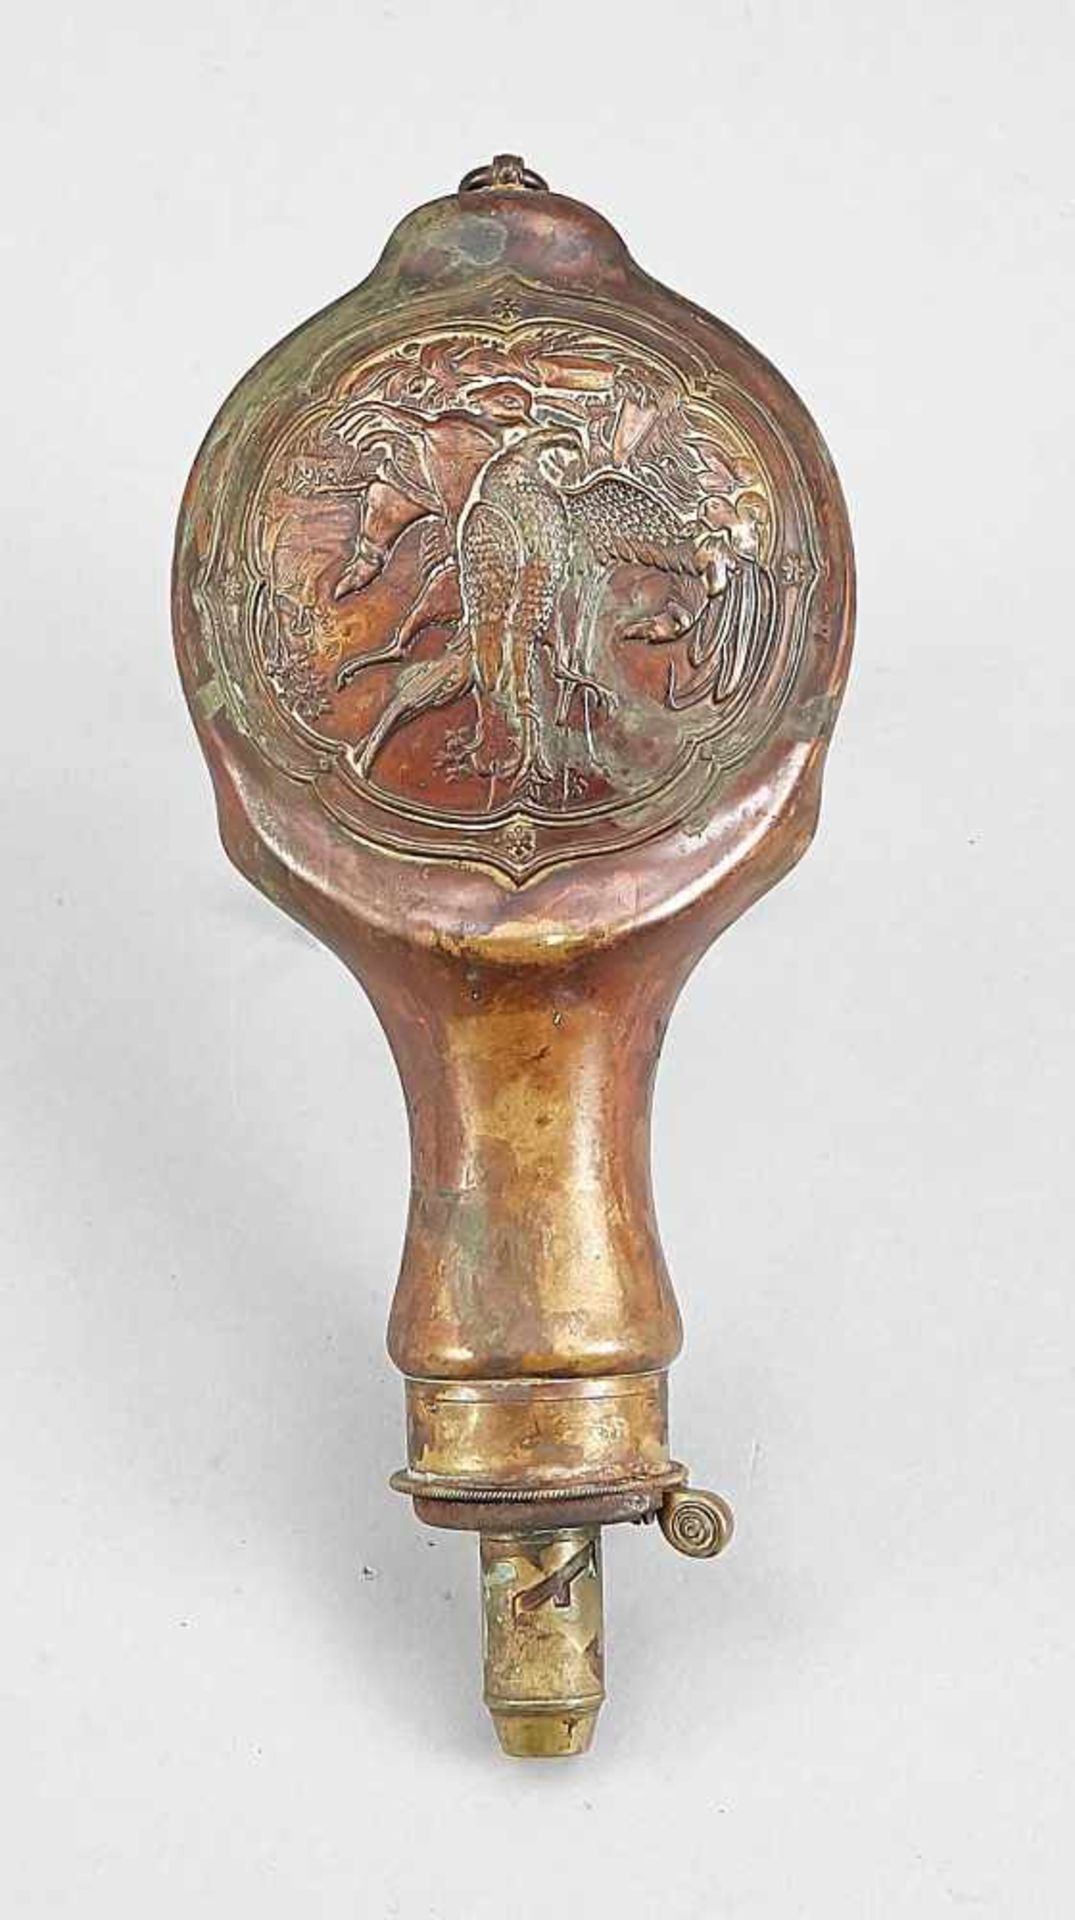 Powder bottle with hunting motif in relief and an engraved erotic scene on the back, 19th